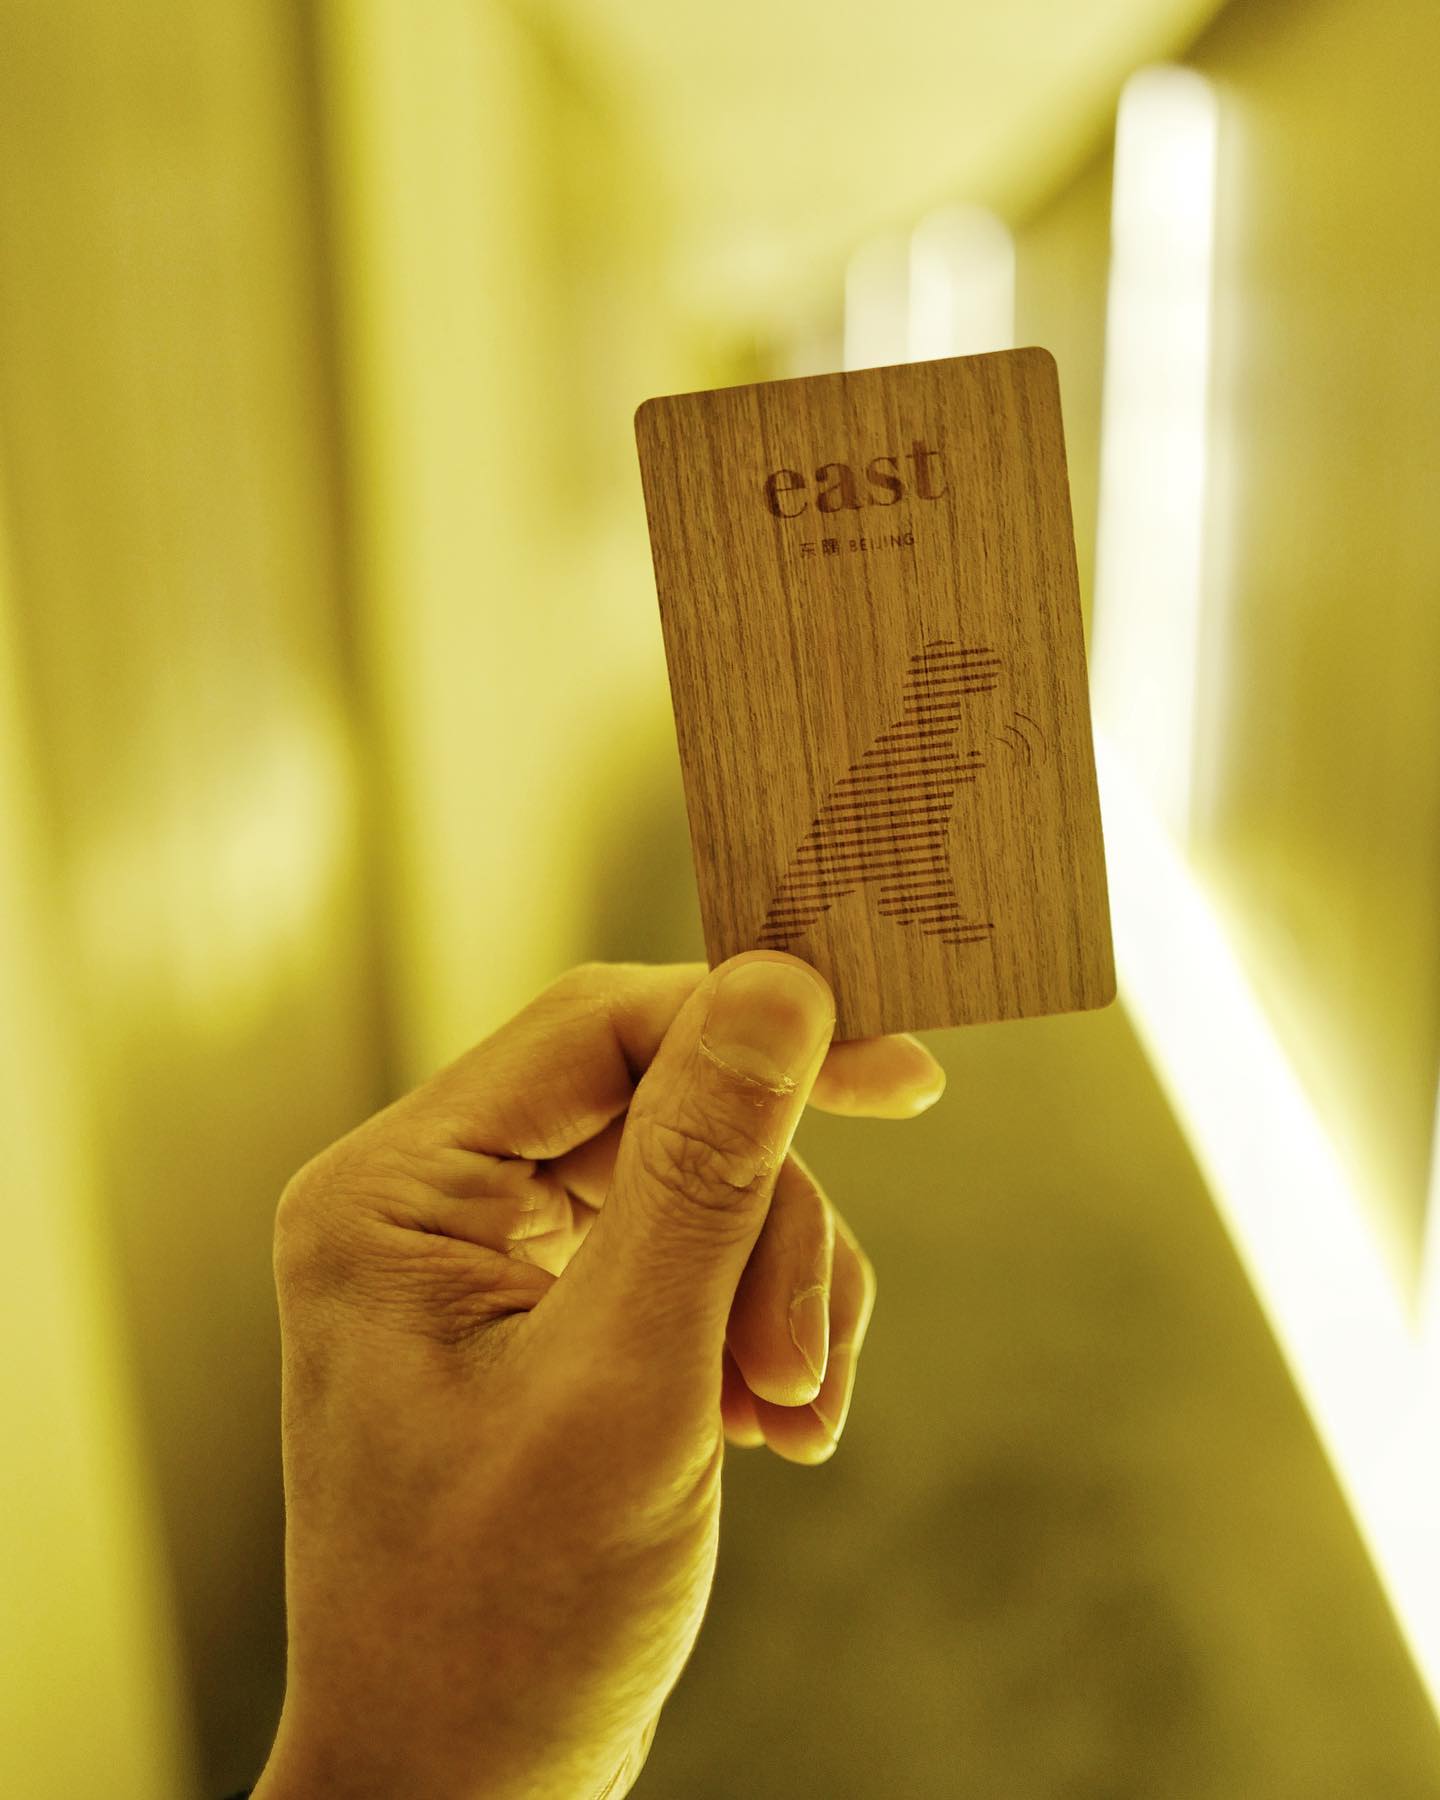 The key to waste less.
We changed our plastic room keys to recycled one which made by cherrywood, guiding you stay with a sustainable lifestyle.
#EASTBeijing #SmallActionsBigChanges #DidYouKnow #reusereducerecycle